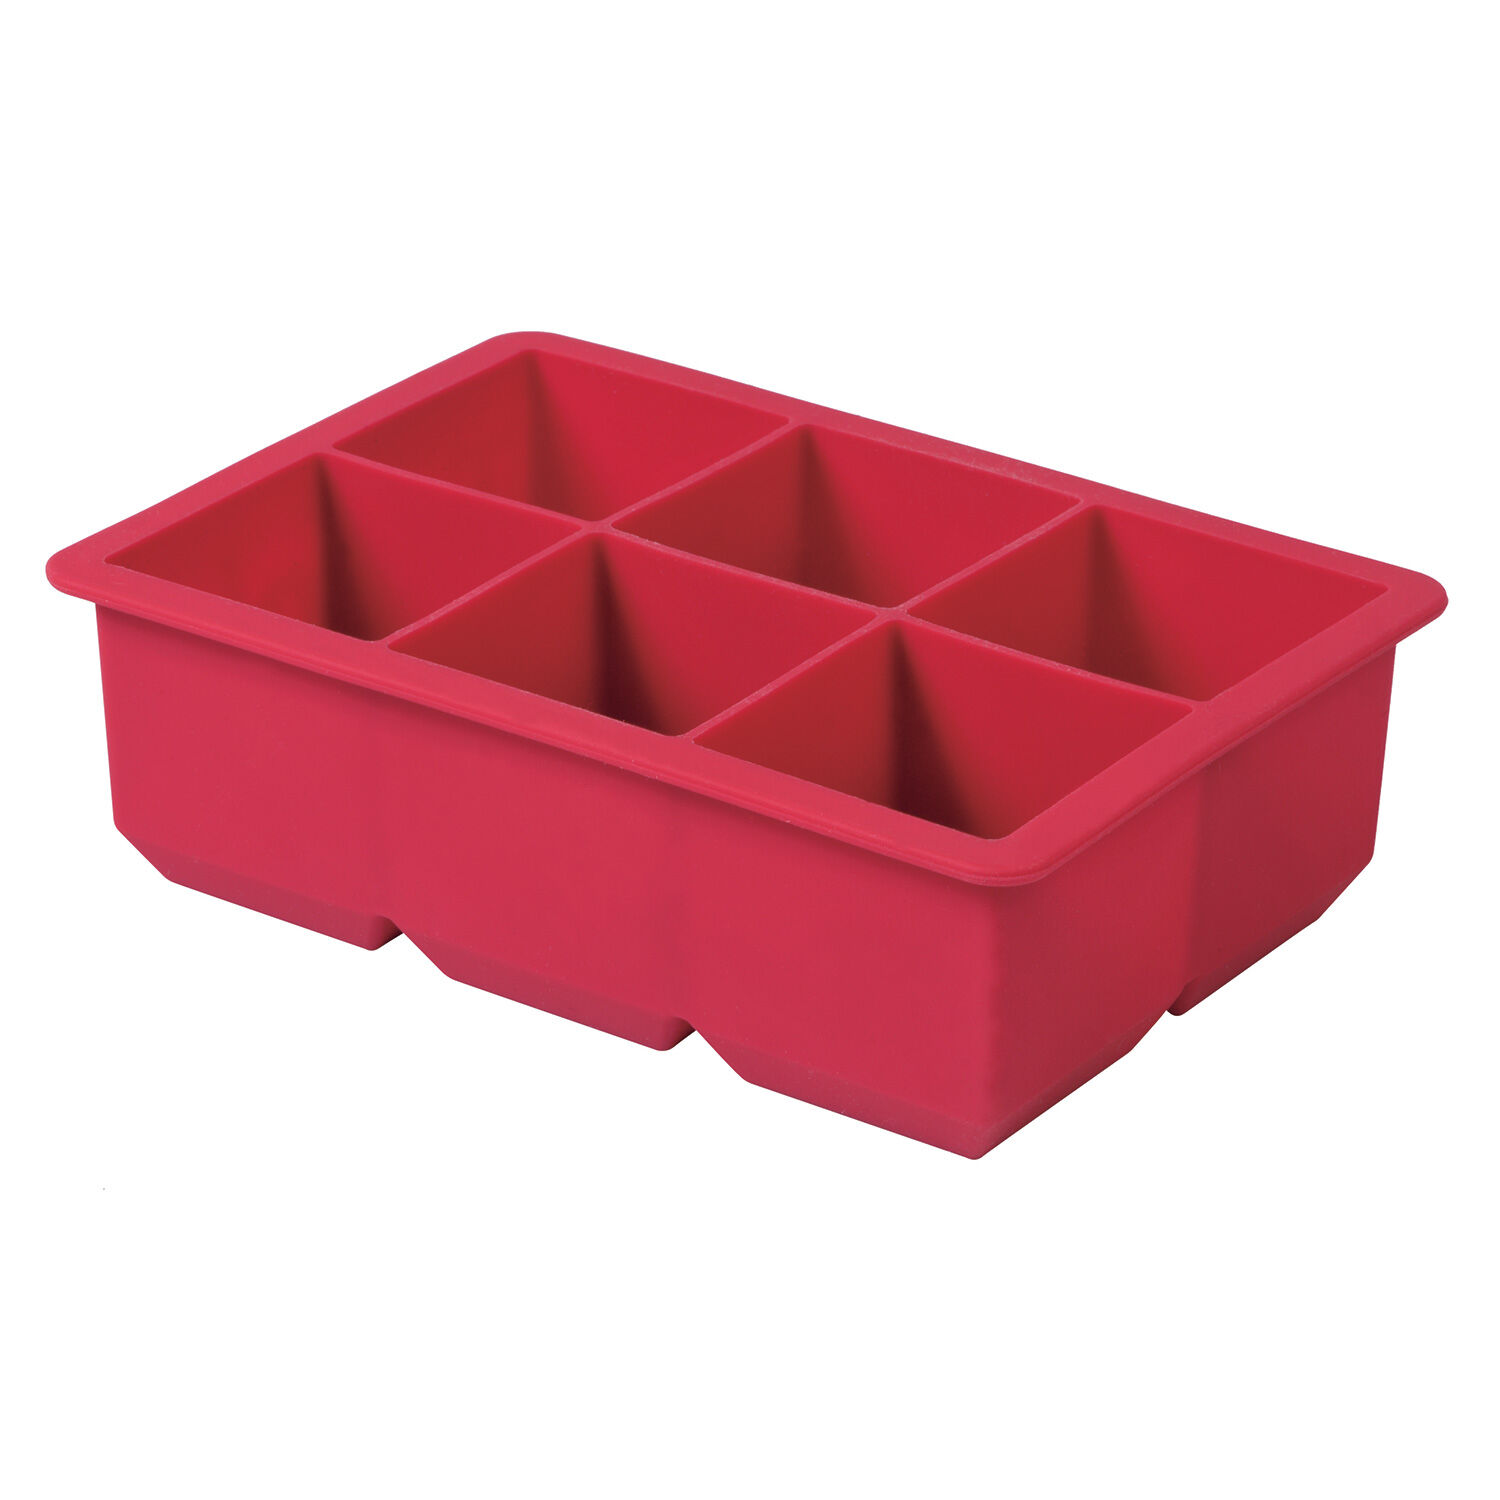 https://www.homestoreandmore.ie/dw/image/v2/BCBN_PRD/on/demandware.static/-/Sites-master/default/dw1017250b/images/Kitchen-Classic-Giant-Ice-Cube-Tray-kitchen-gadgets-and-accessories-075287-hi-res-1.jpg?sw=1500